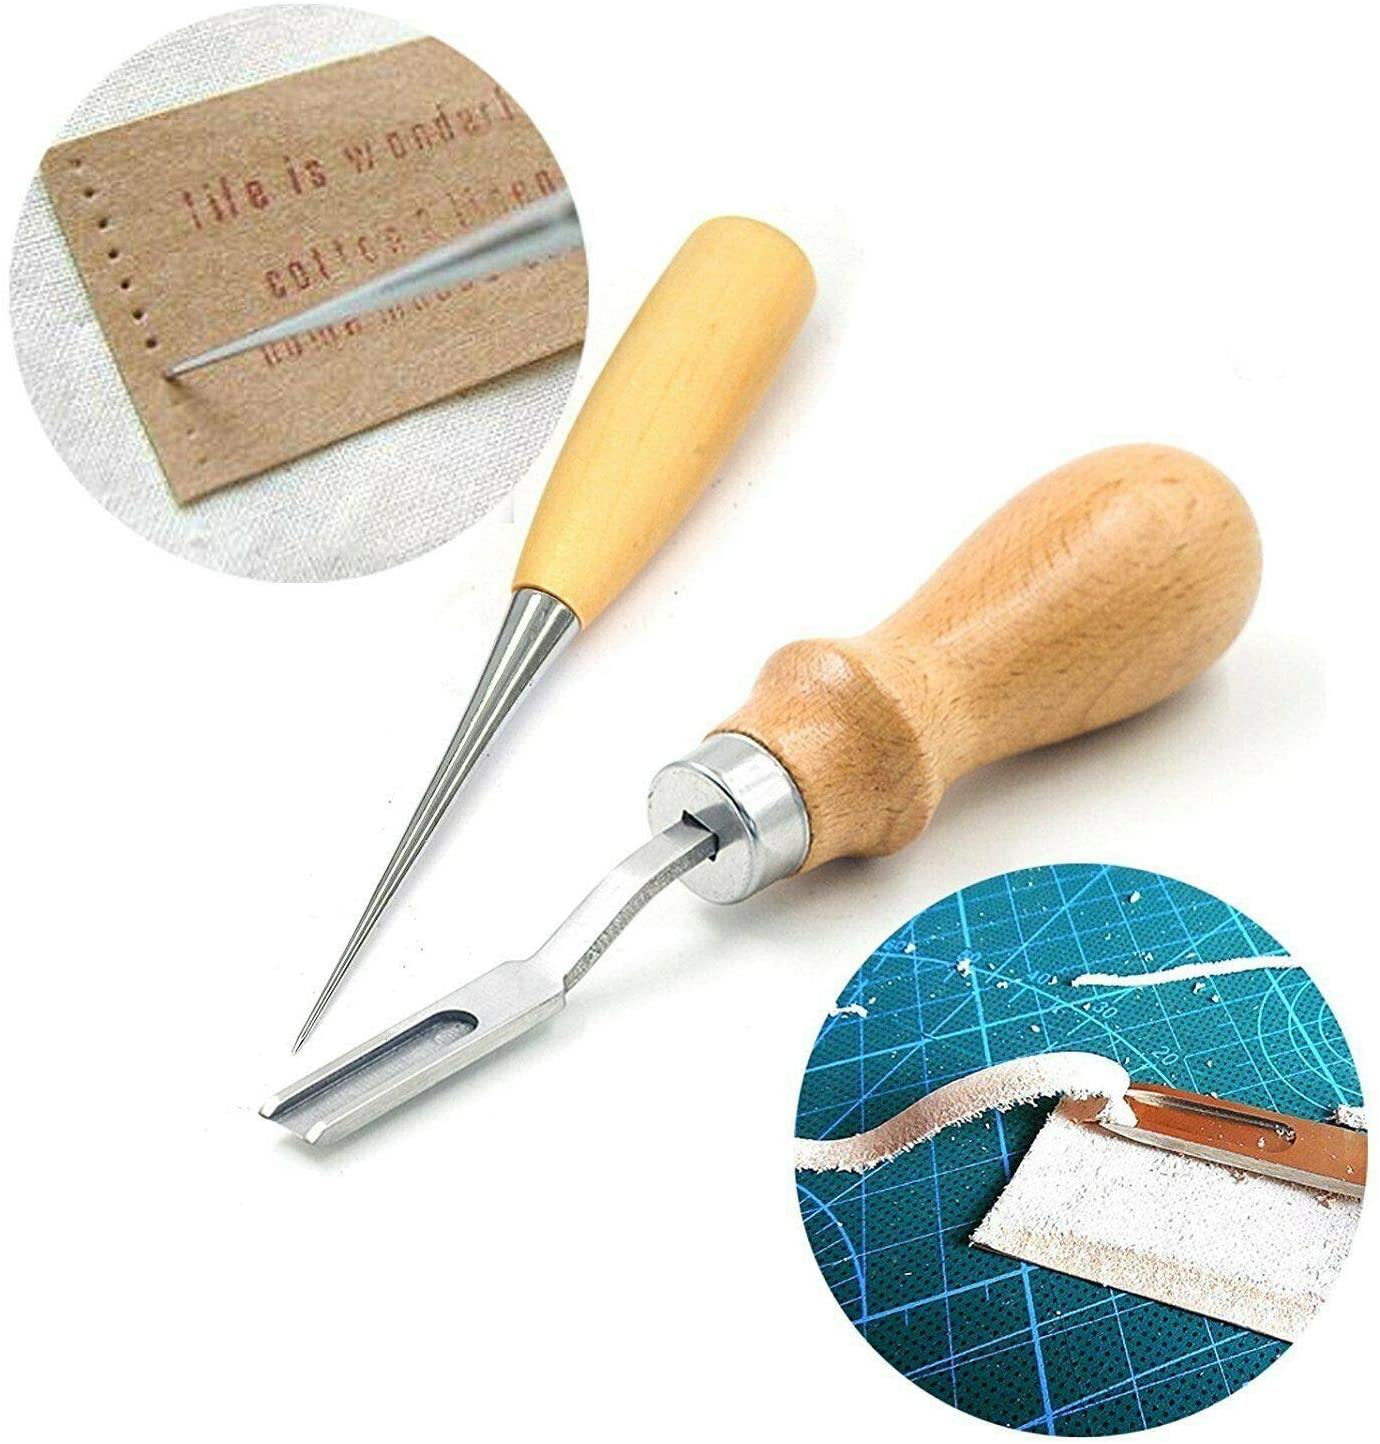 Leather Working Tools Kit 103 Pcs, Leather Craft DIY Tools with Stamping  Tool, Cutting Mat, Snaps Rivets Kit, Stitching Groover, Waxed Thread,  Leather Tool Kit for Stitching Punching Cutting Sewing